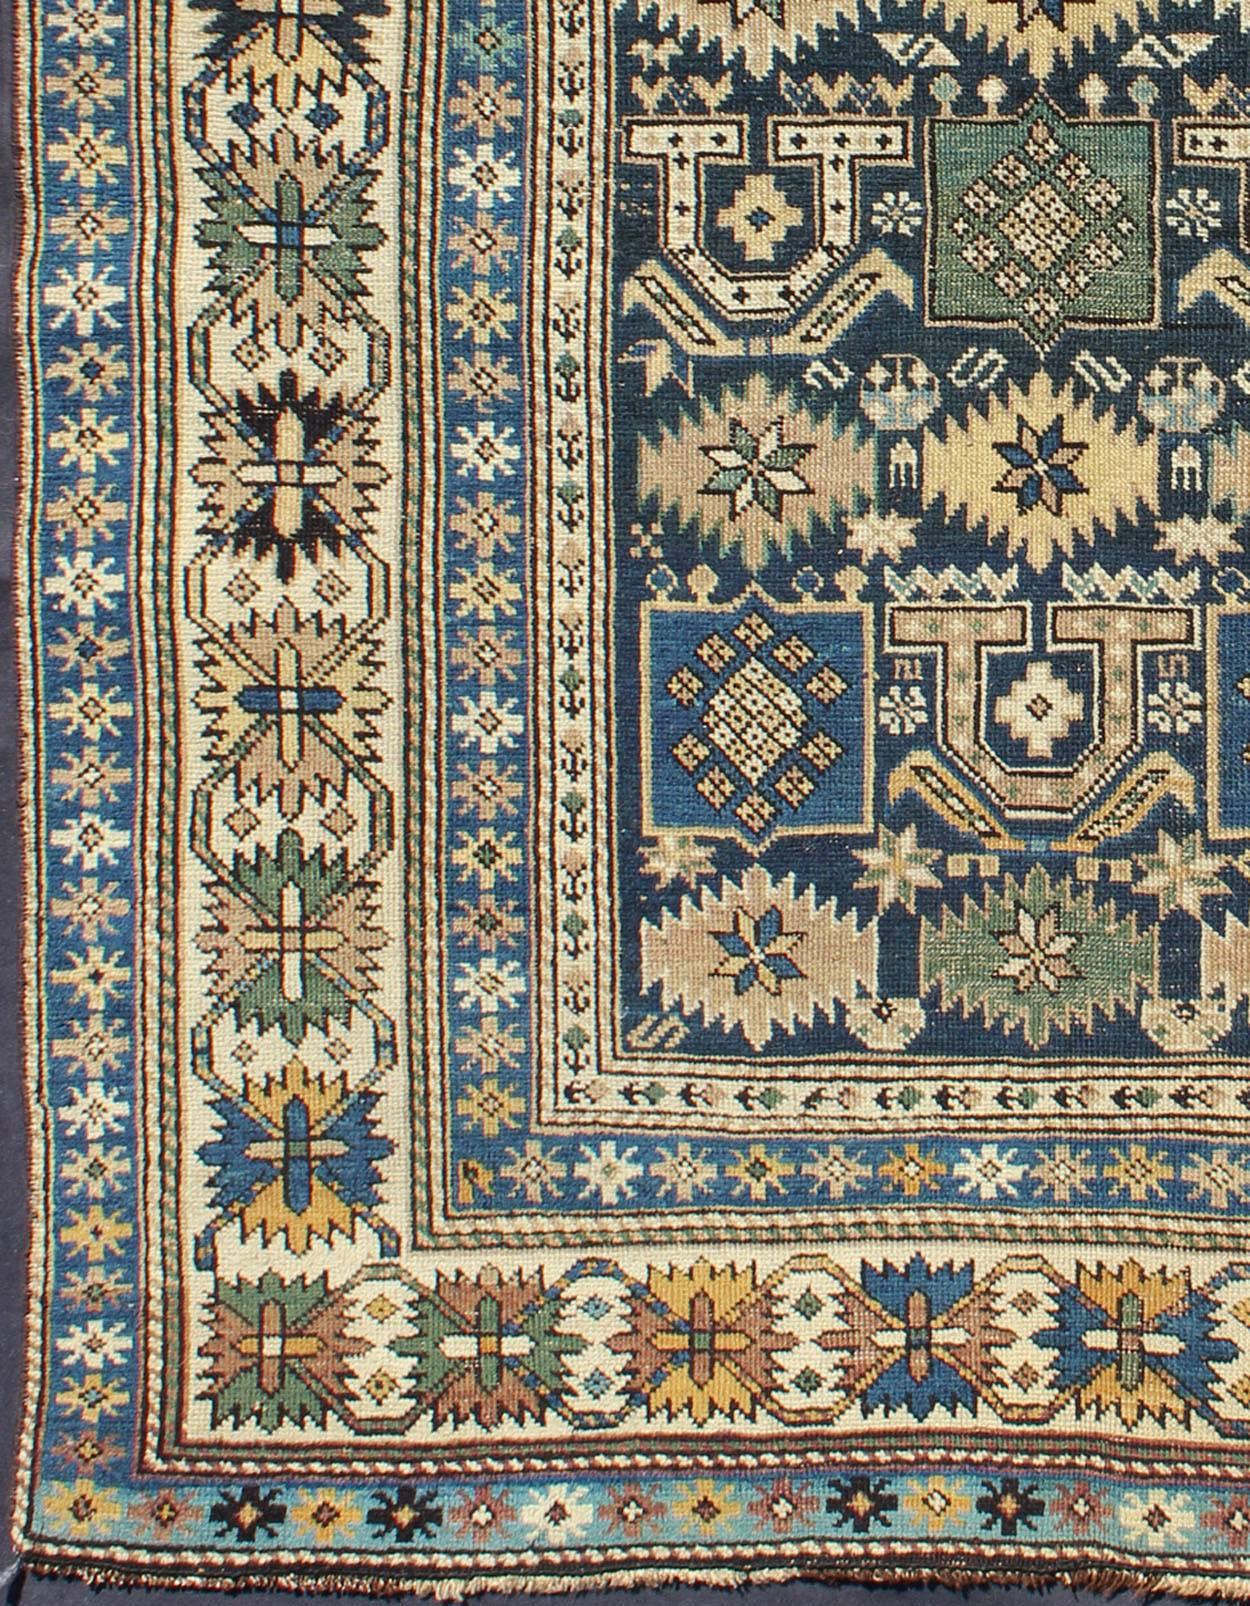 Measures: 3'3'' x 4'5''.

The field of this Caucasian piece features all-over tribal motifs and shapes decorated with small flowers and square designs, alternating colors between tan, blue, green and yellow. A blue background cradles the motifs with